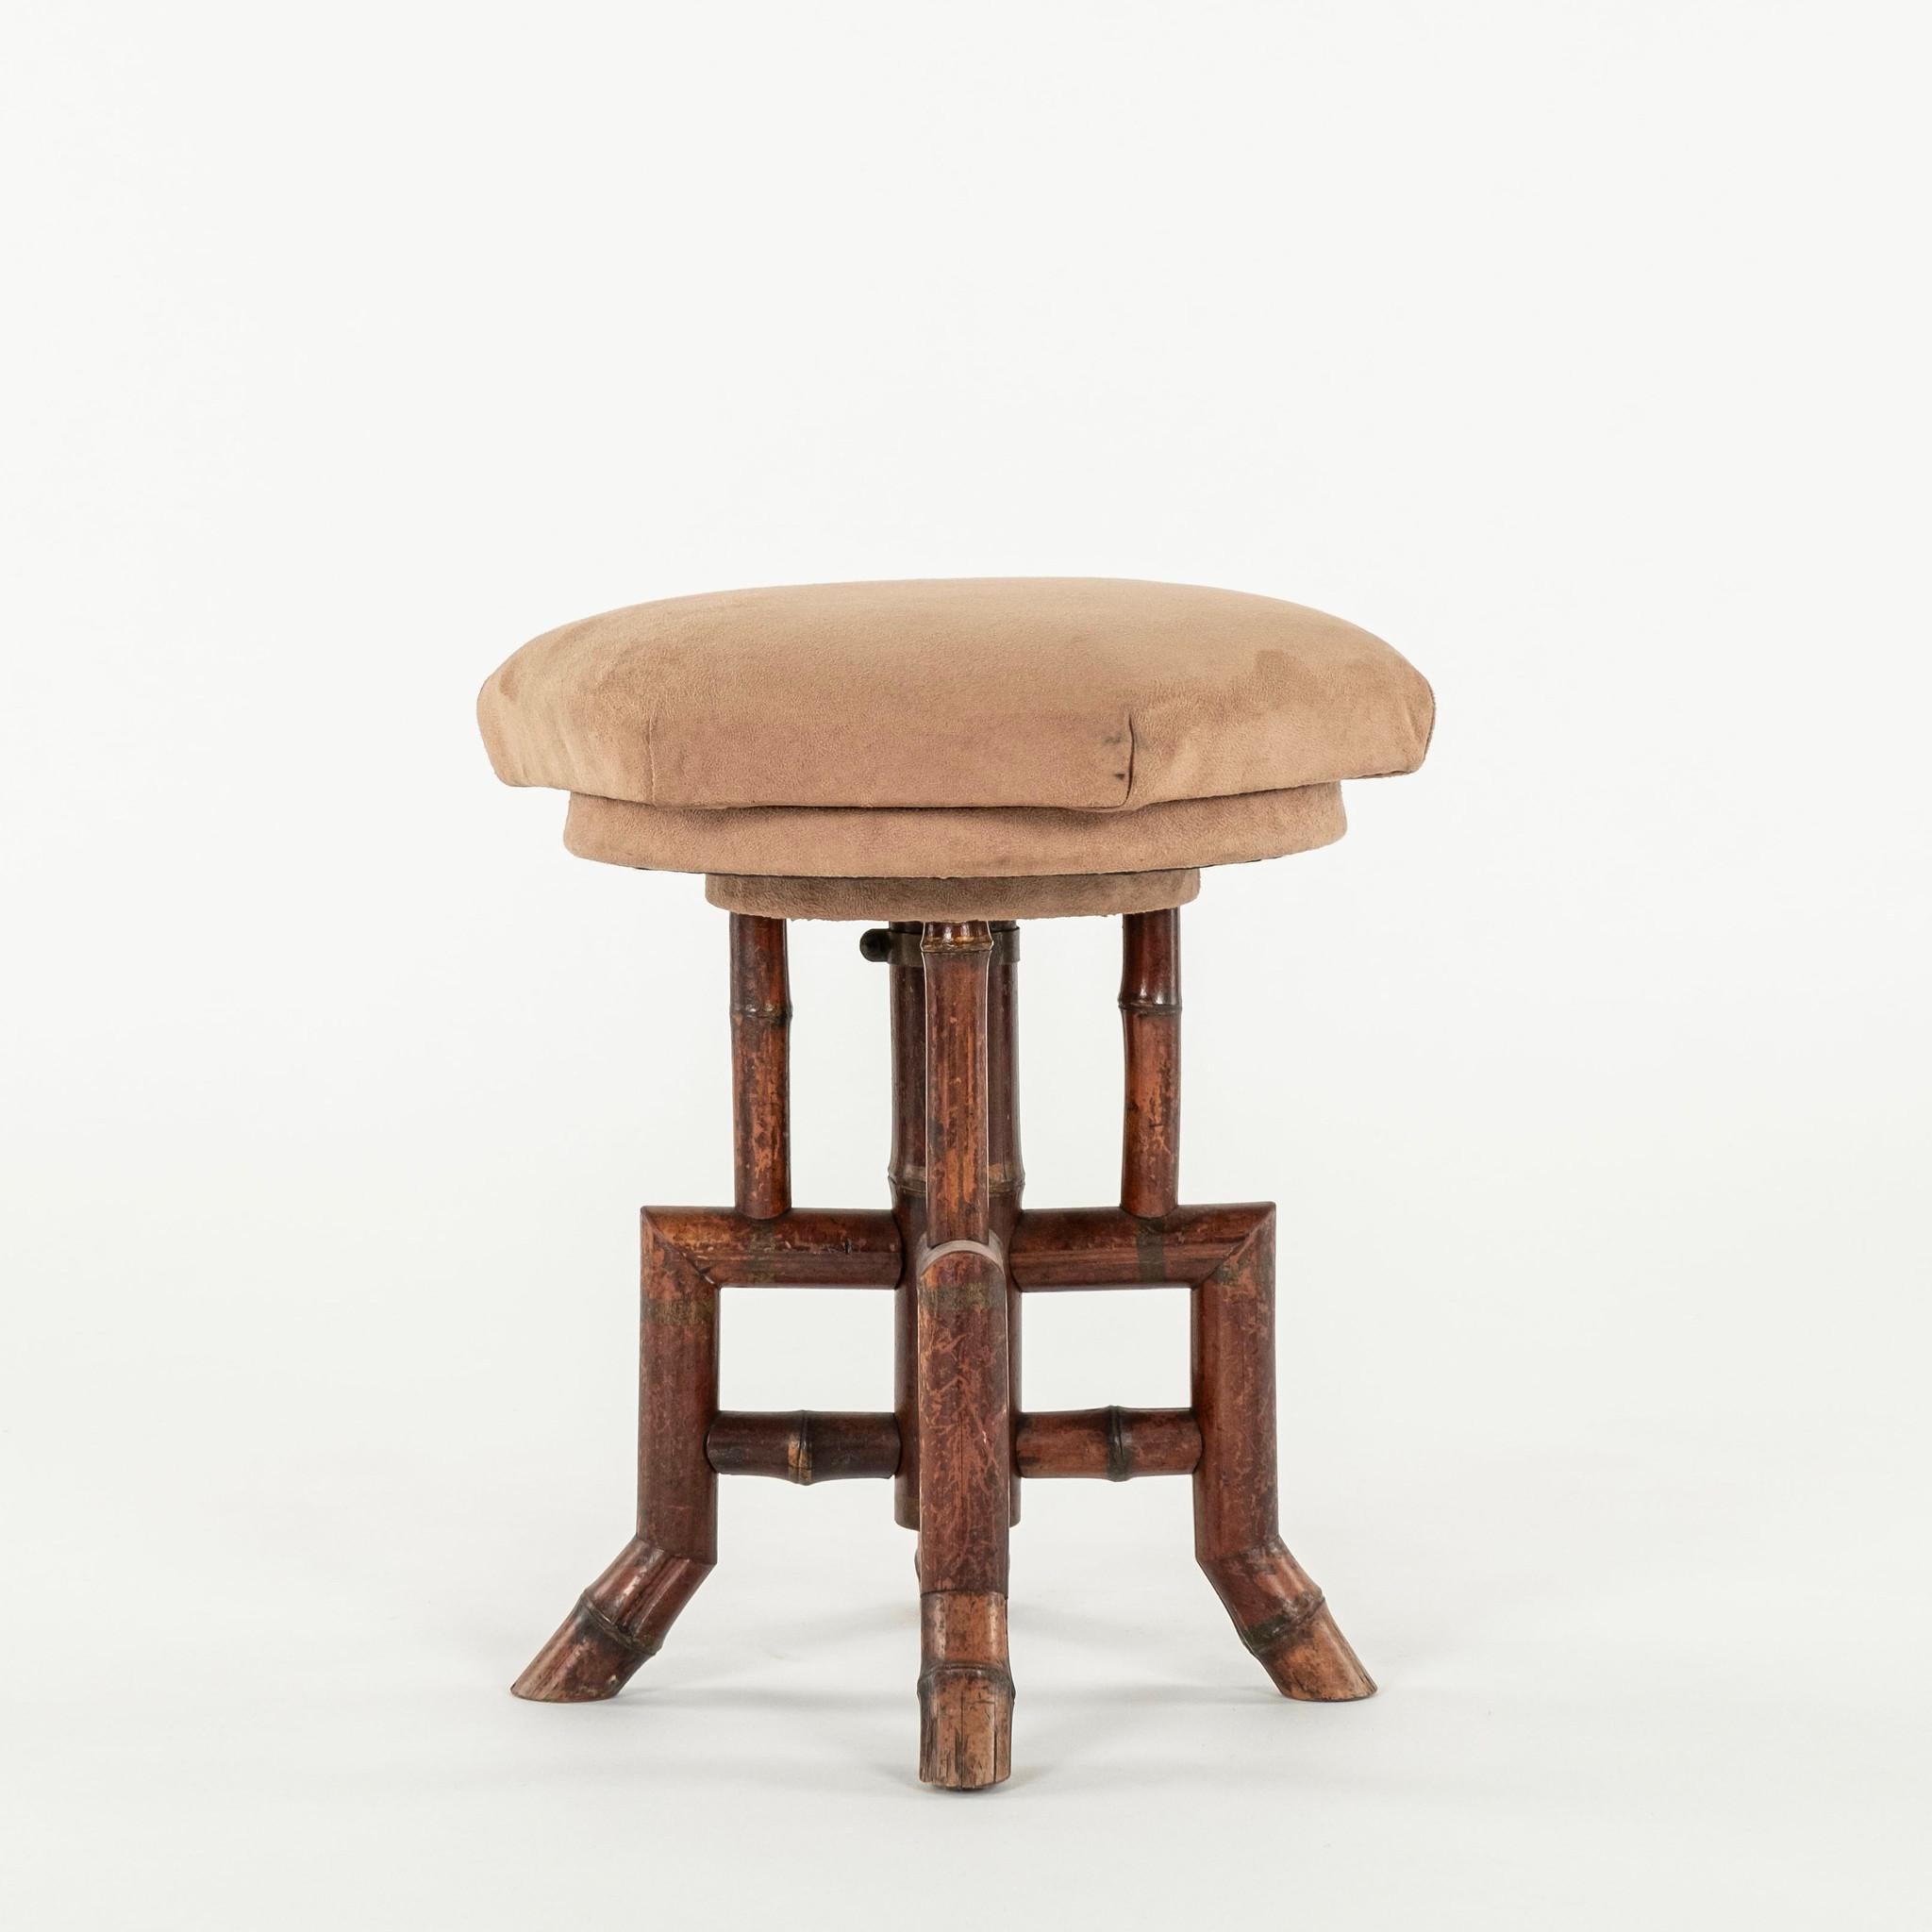 Early 20th Century French bamboo swivel stool newly upholstered in a saddle colored suede.